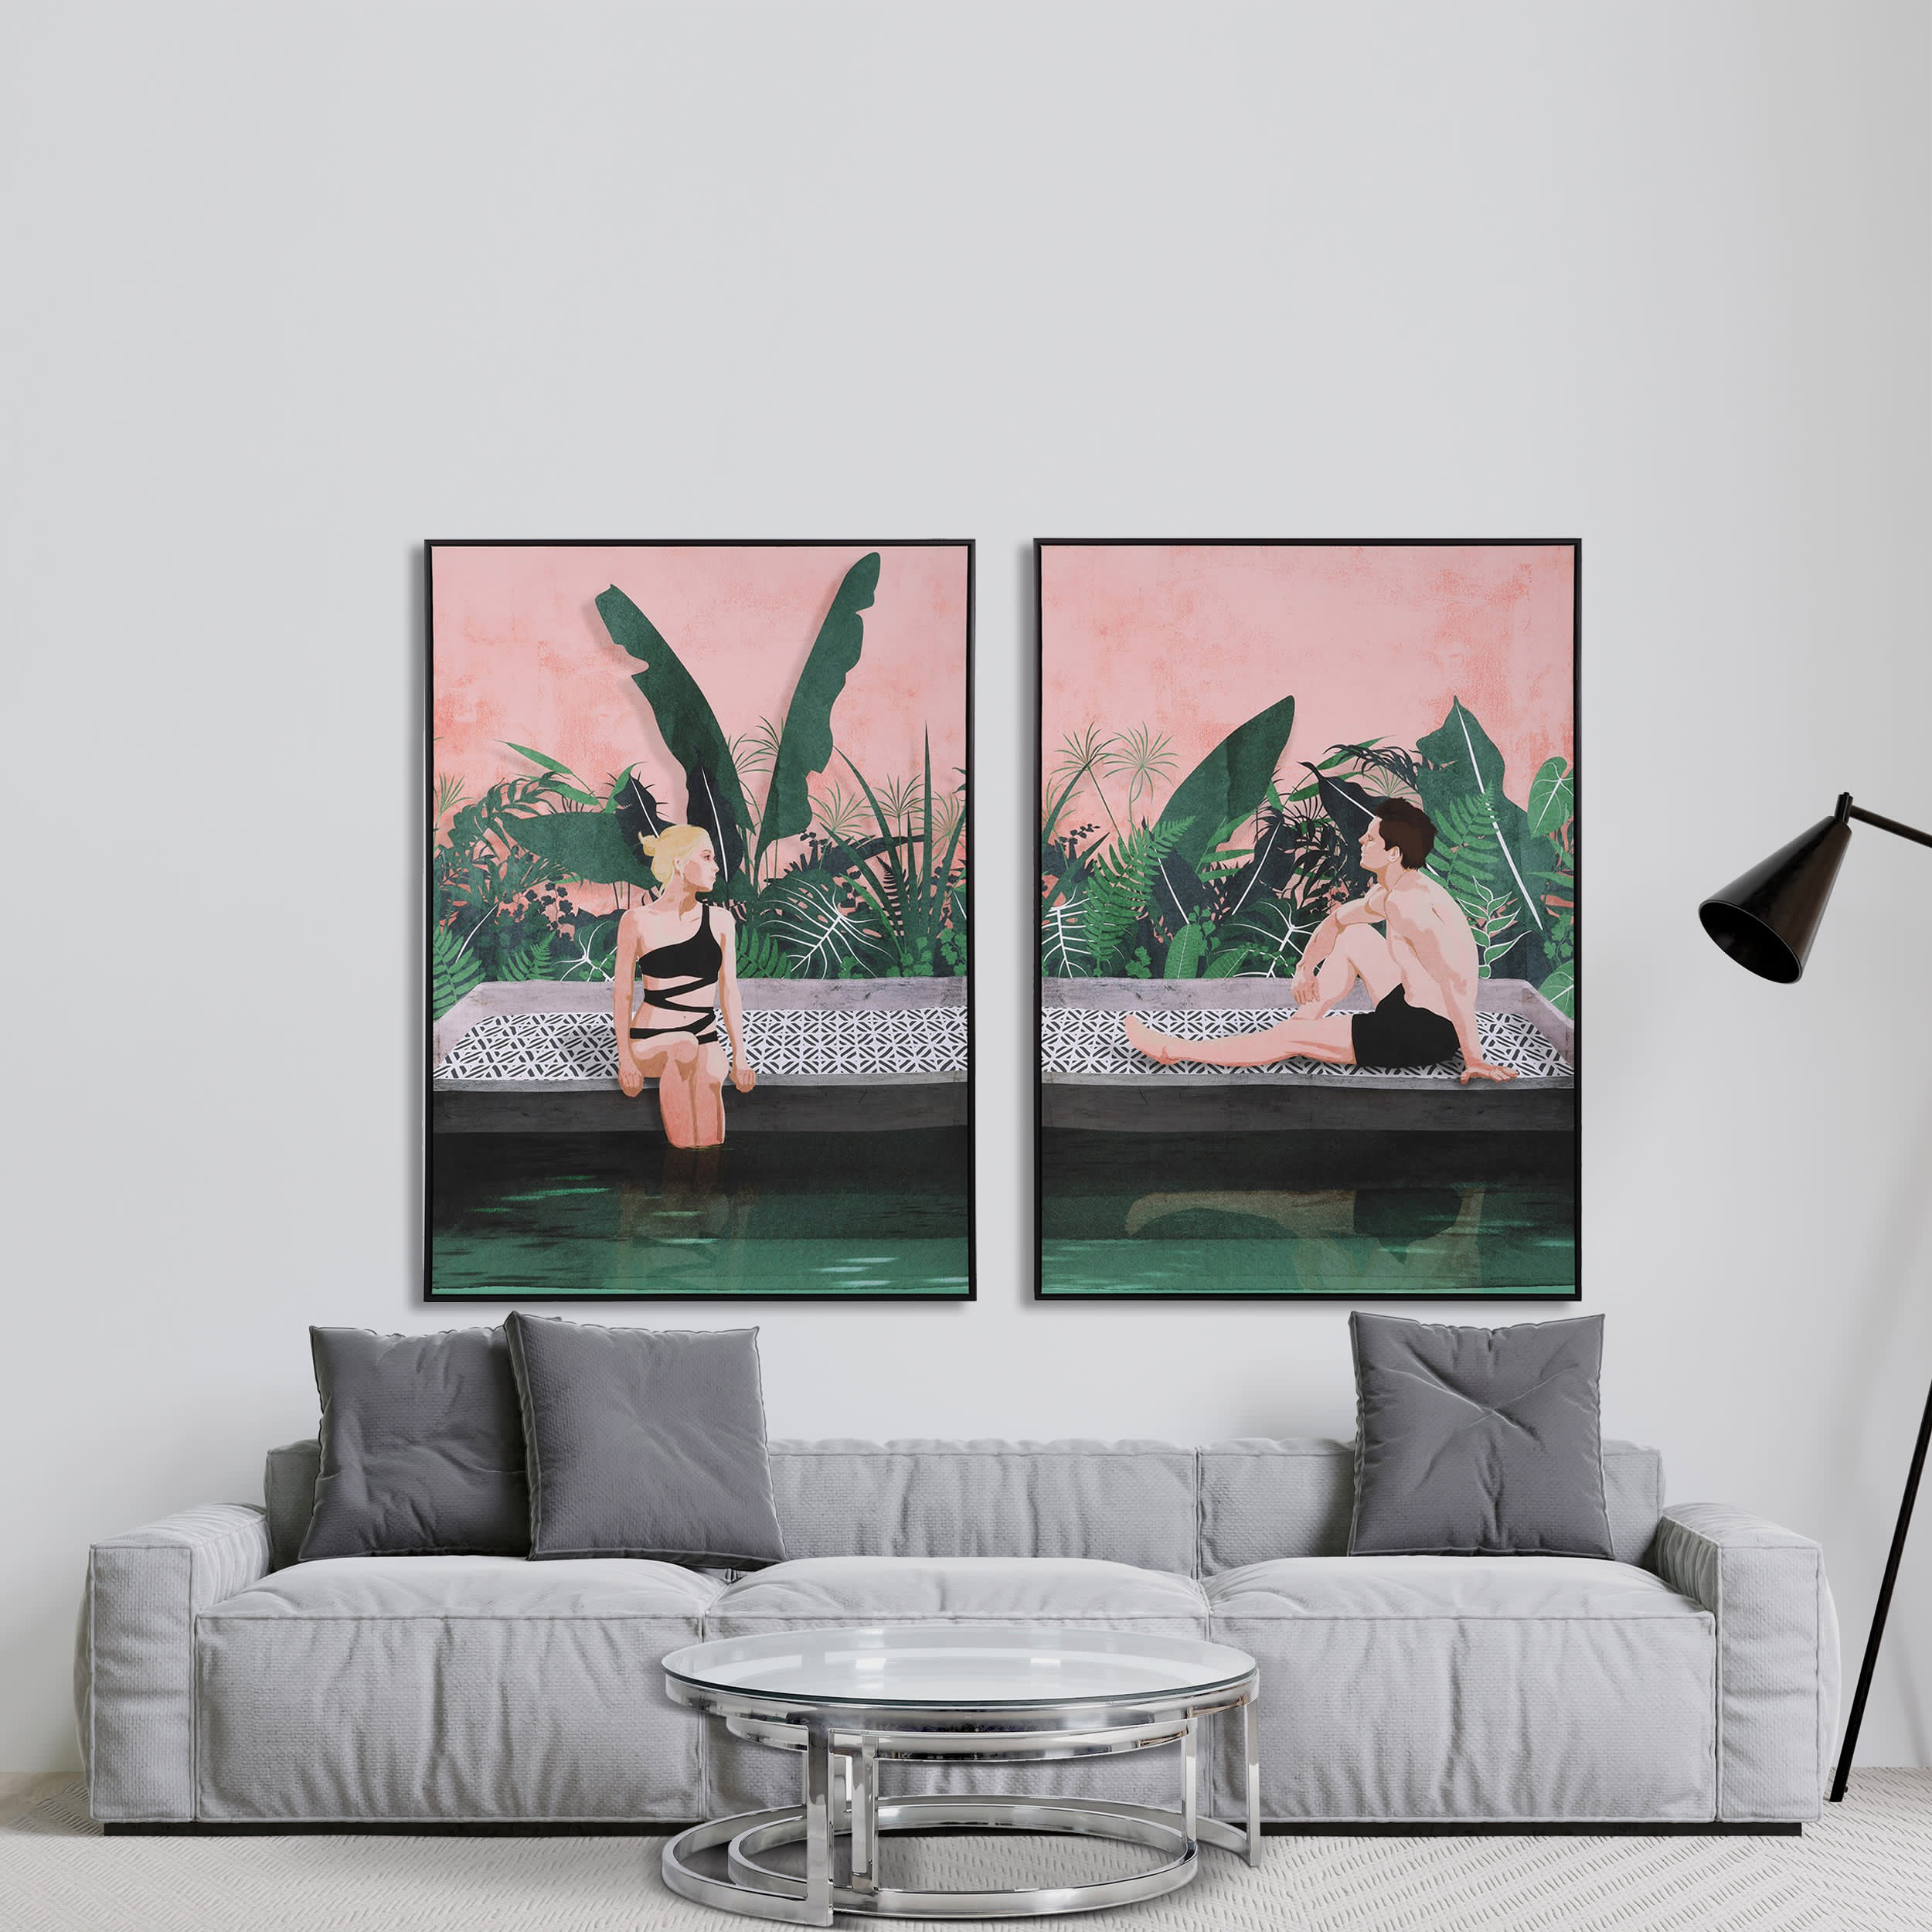 By The Pool Wall Print